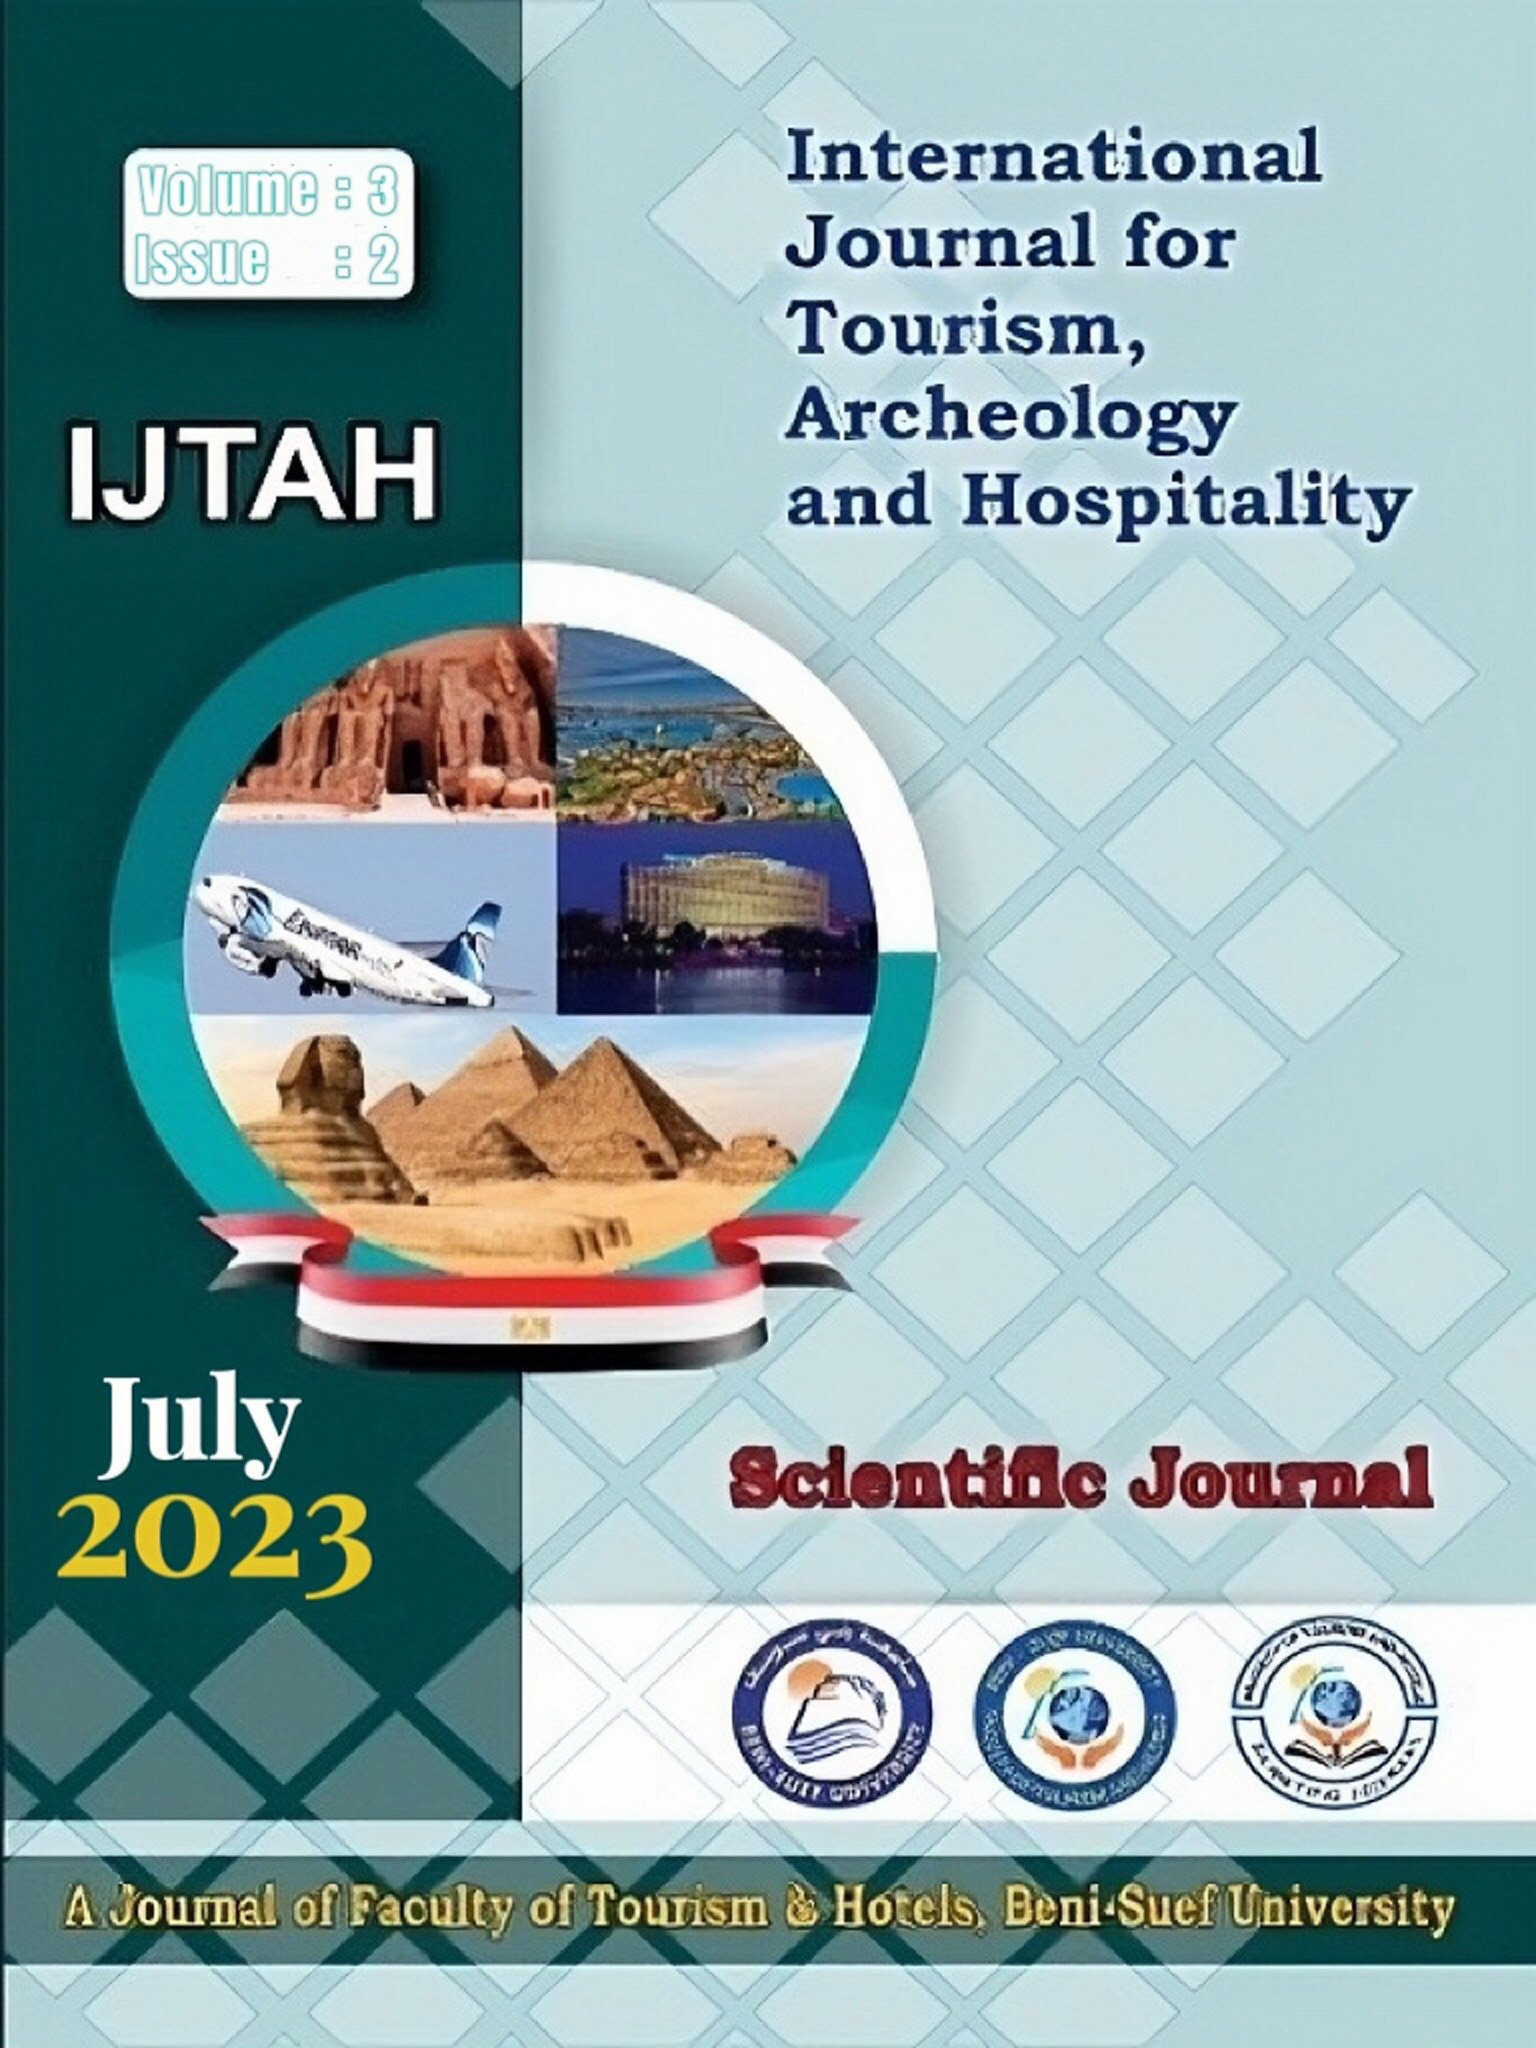 International Journal of Tourism, Archaeology and Hospitality